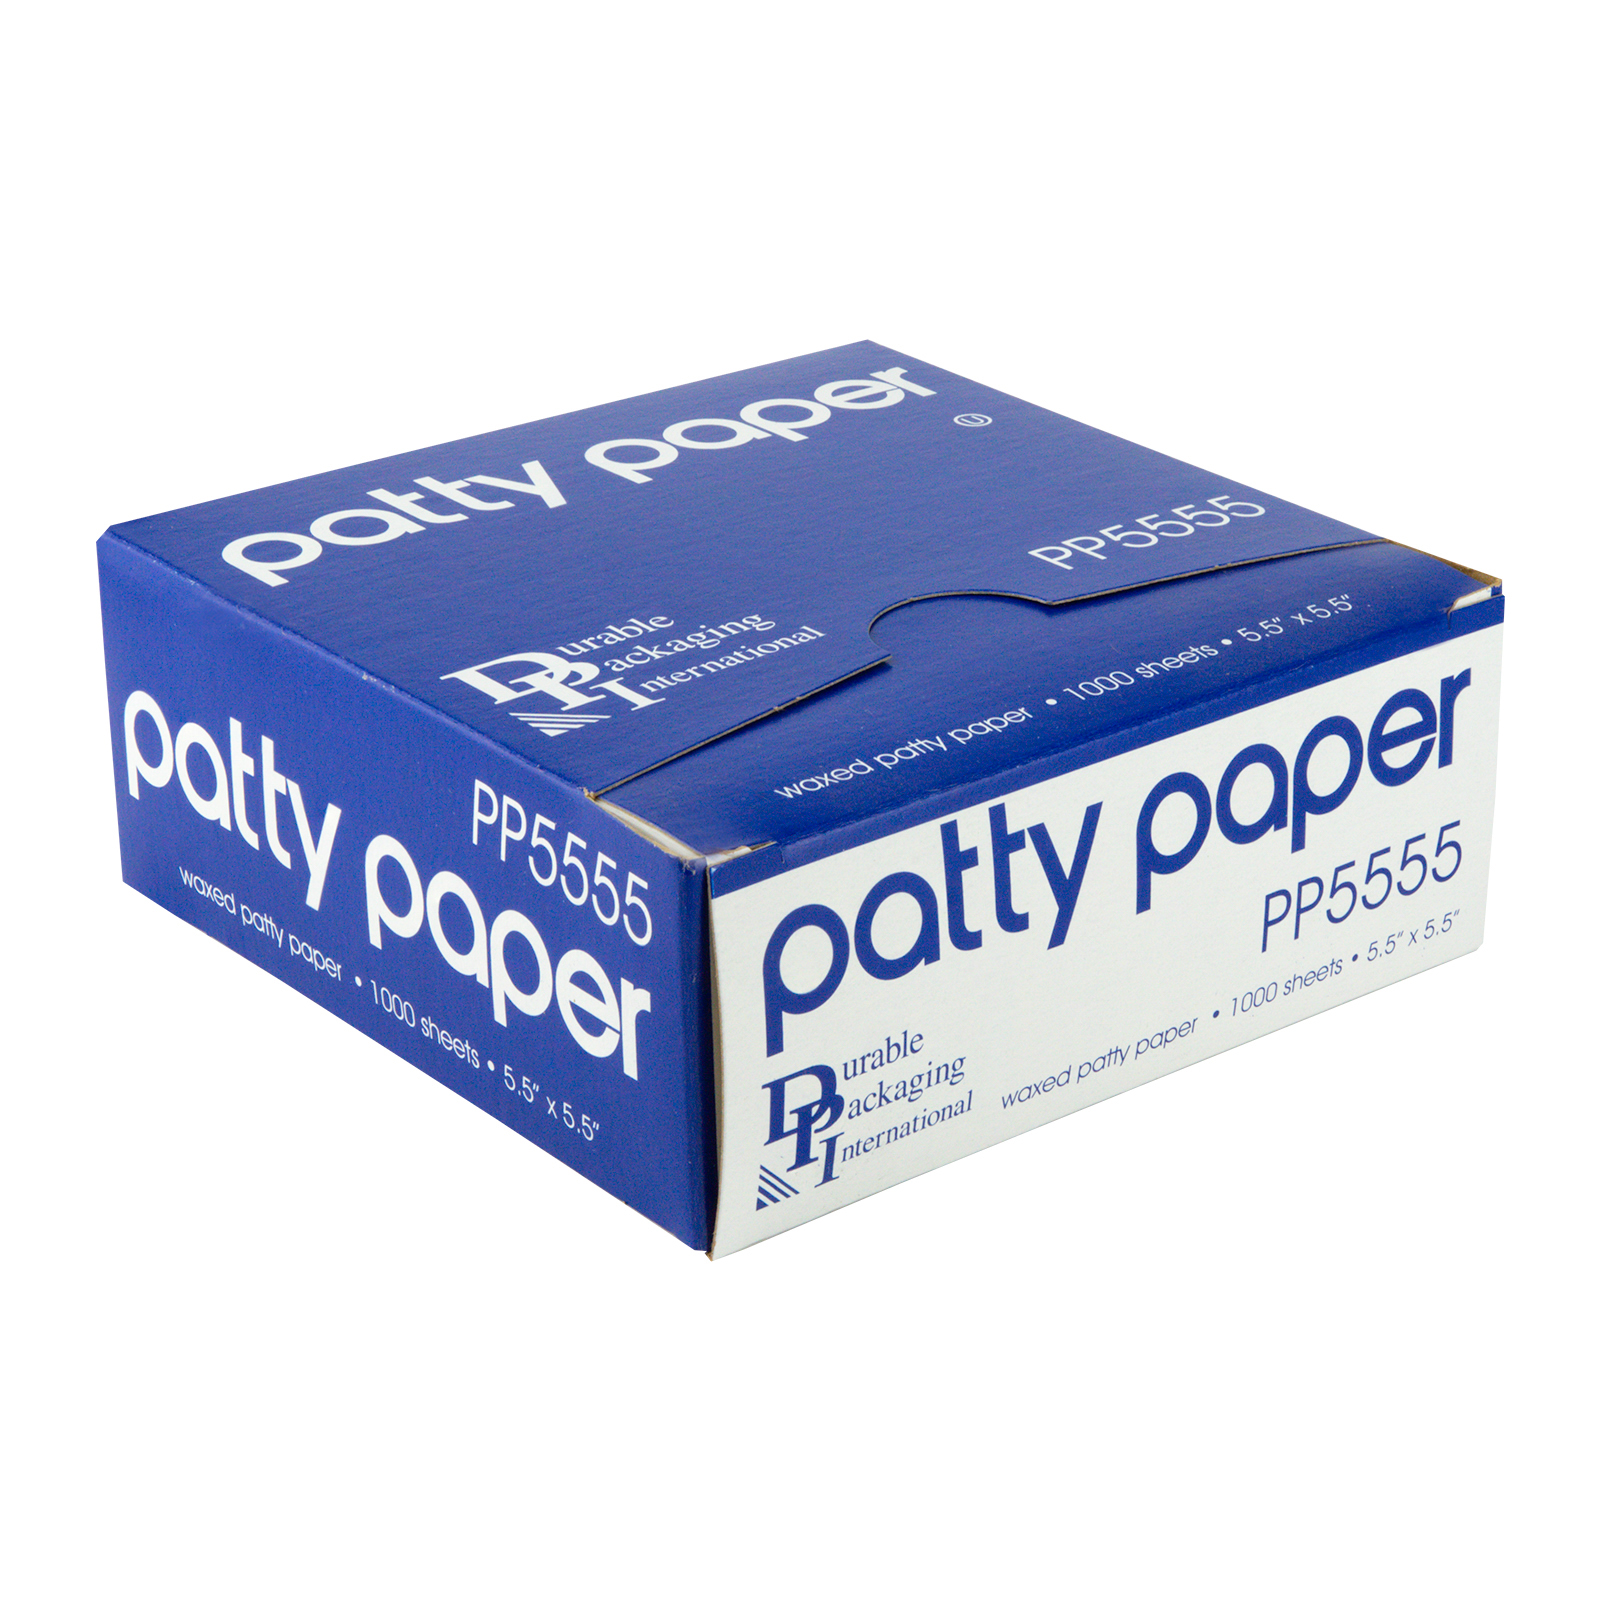 Patty Paper Sheets, Waxed - 1000/case